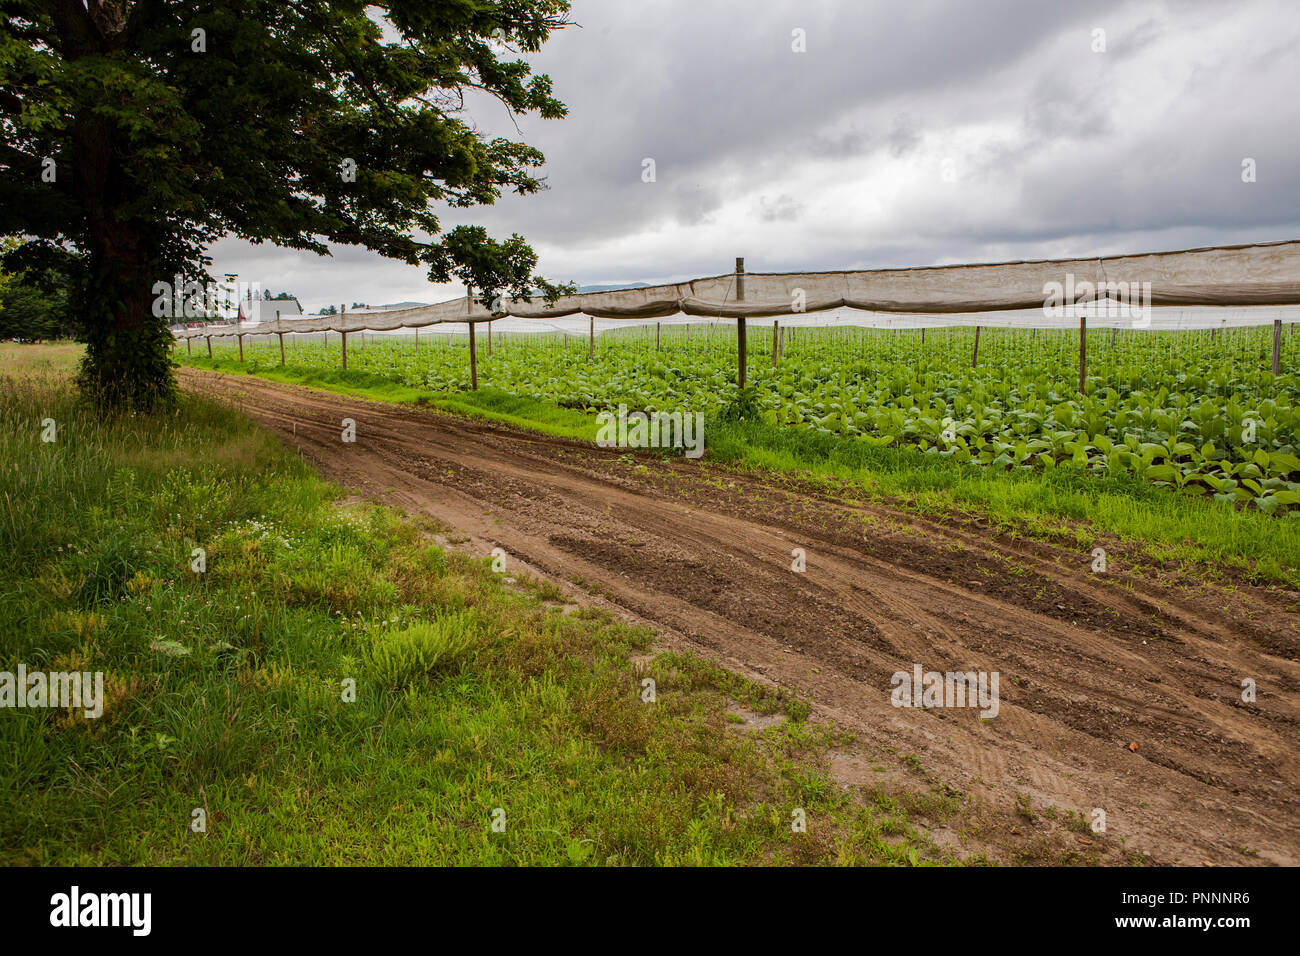 A tobacco farm in the Connecticut River Valley Stock Photo